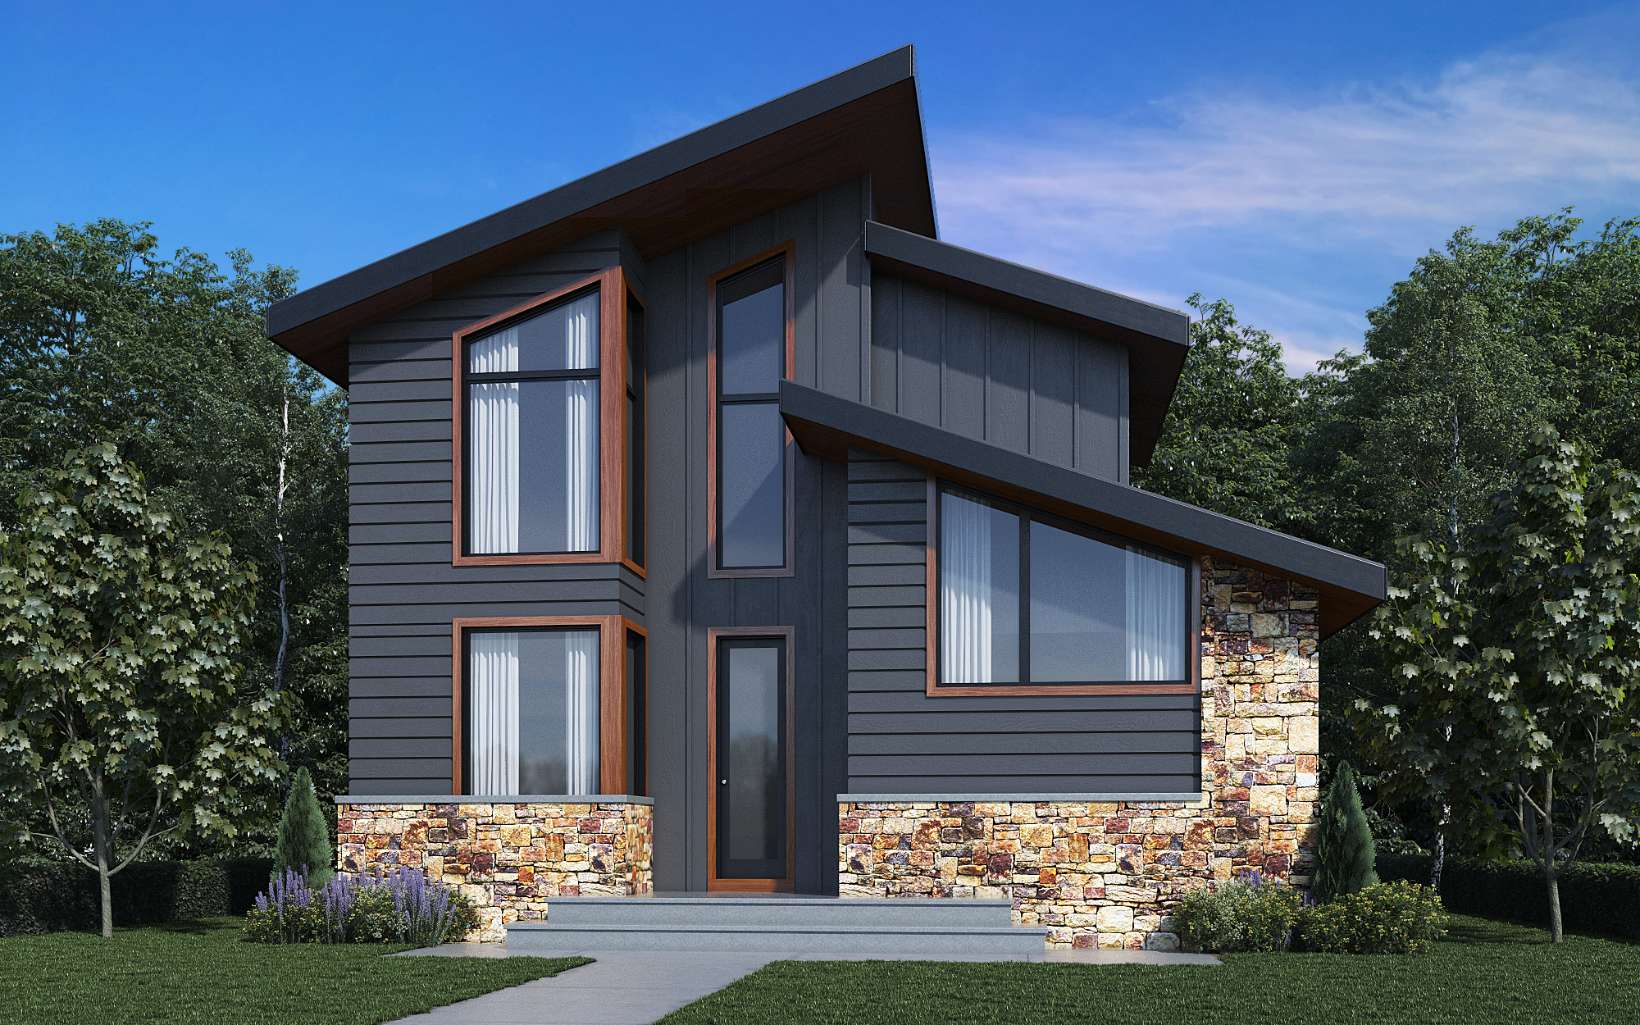 PRE-CONSTRUCTION | Just a stone’s throw from Lake Blue Ridge, and less than five +/- minutes to downtown Blue Ridge, this splendid modern new construction is one you don’t want to miss, as it is truly one-of-a-kind. This contemporary plan will offer 2BR/2.5BA with an open living area, and a beautiful blend of modern rustic finishes. Whether you’re considering full time living or your North Georgia Mountain getaway, you’ll appreciate the convenience to the public boat ramp, Lake Blue Ridge Marina, Toccoa River, Aska Adventure Area AND downtown Blue Ridge. It’s time to bring your mountain living dreams to life!